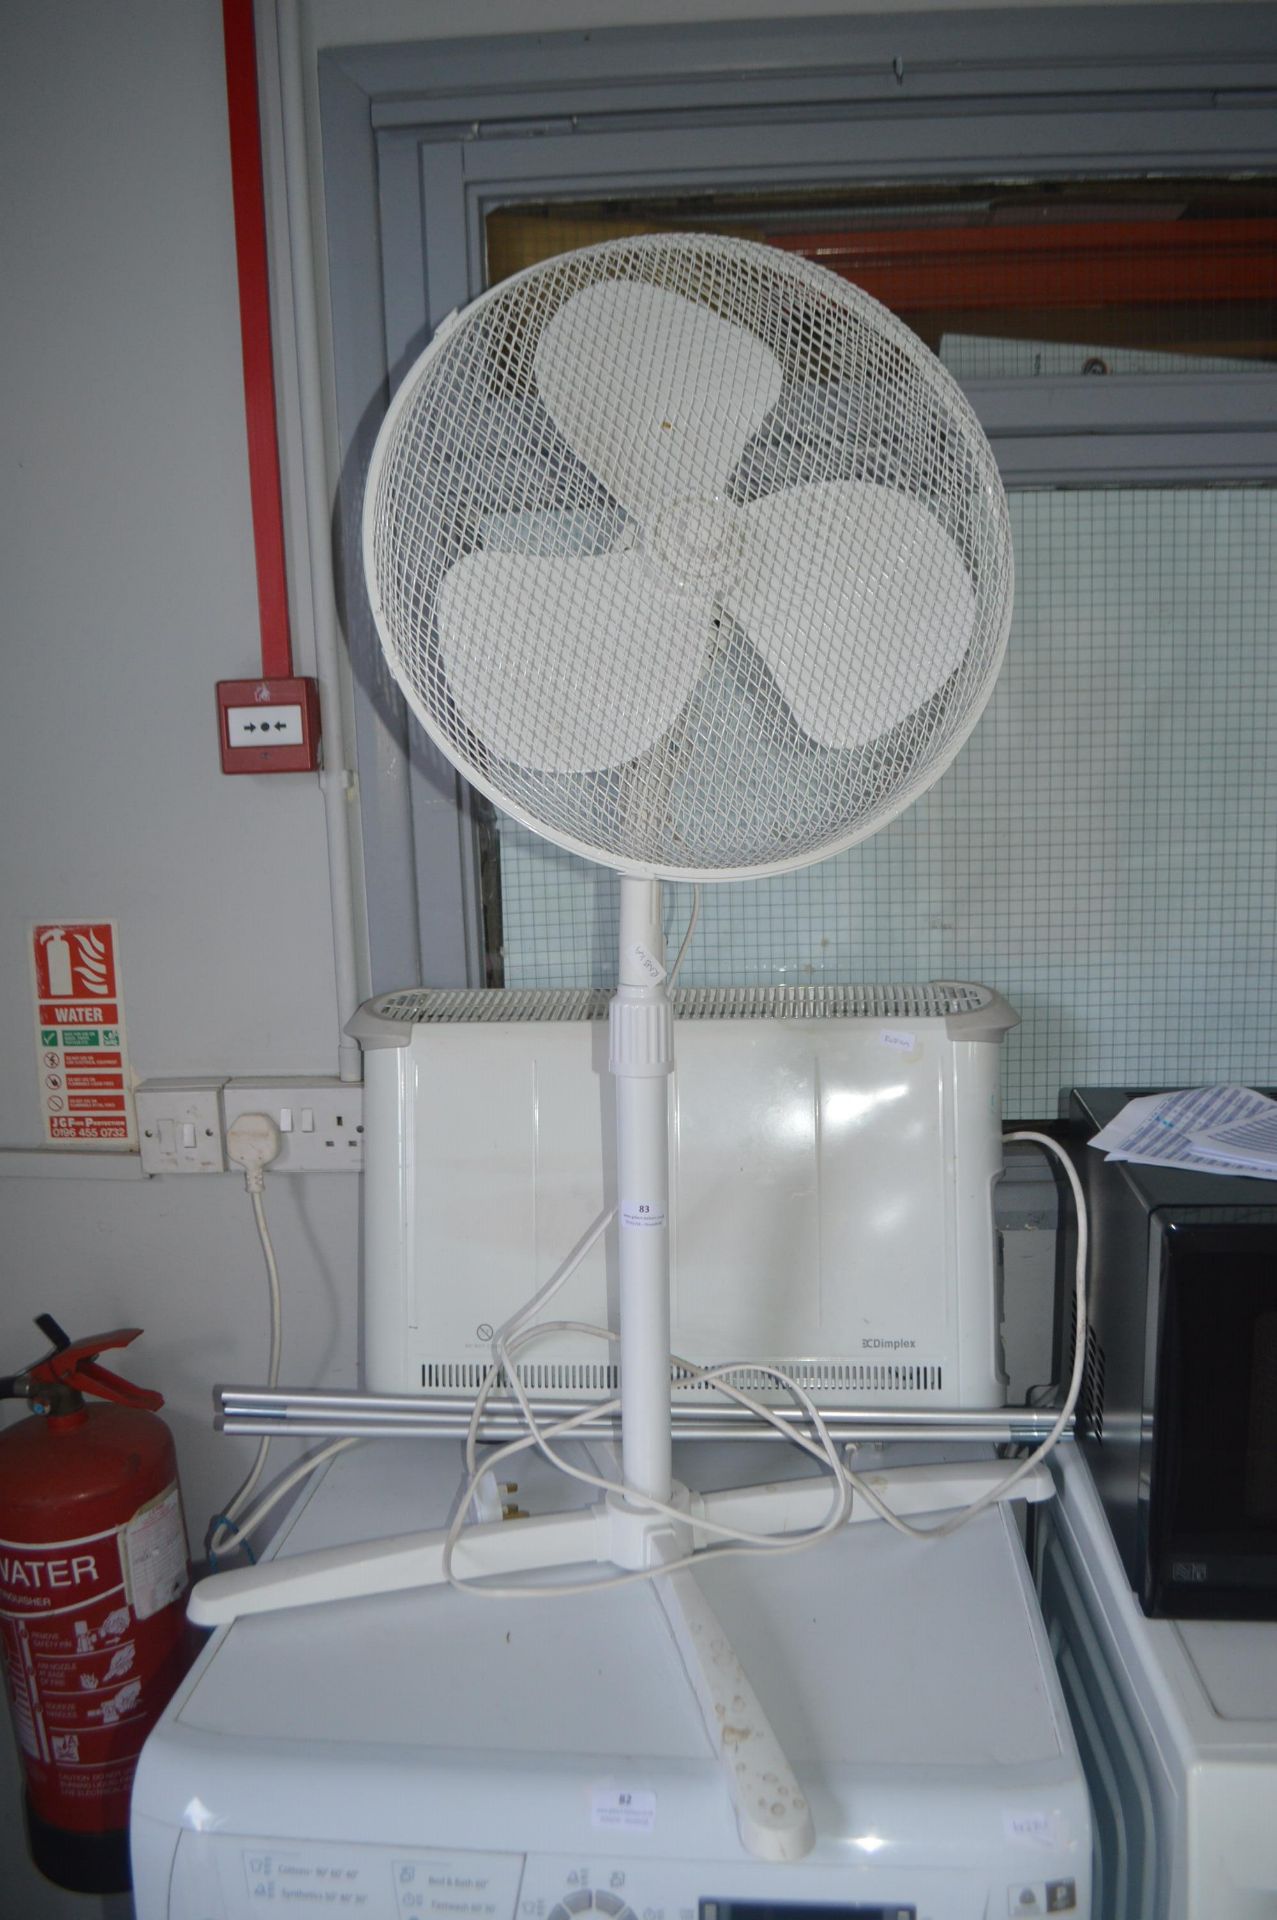 Oscillating Fan and a Dimplex Heater